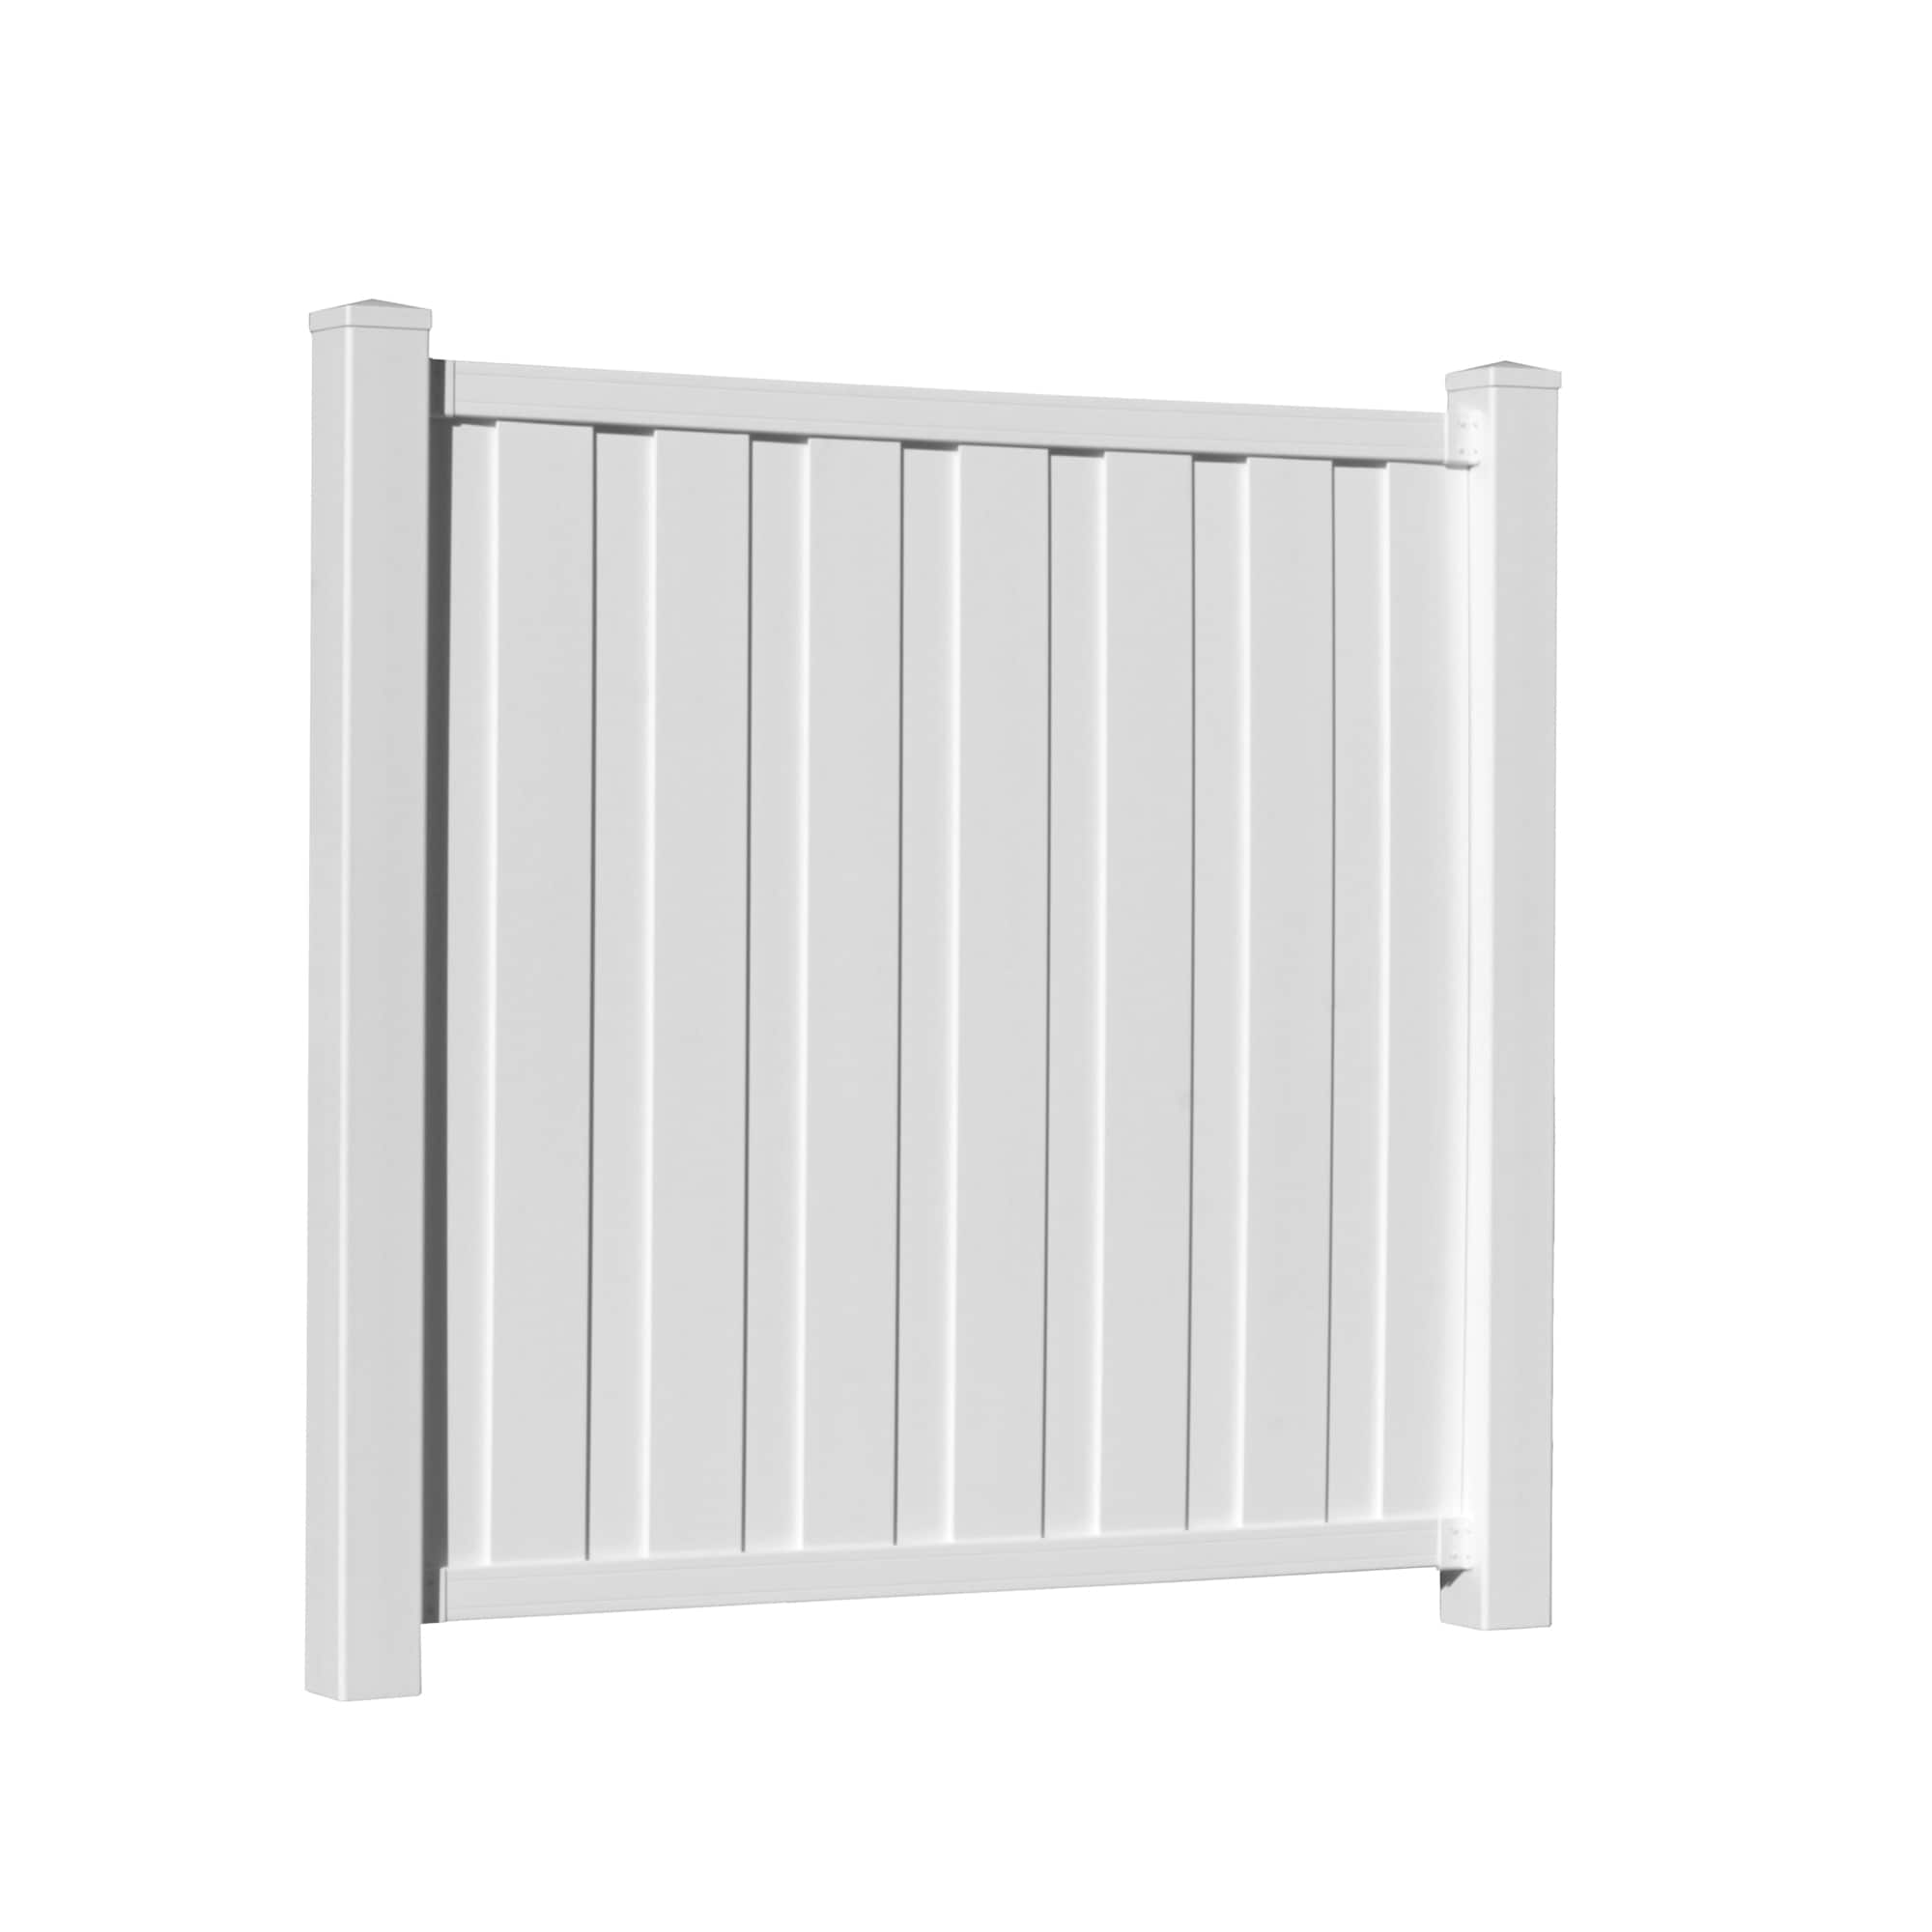 Board-On-Board Vinyl Fencing At Lowes.Com